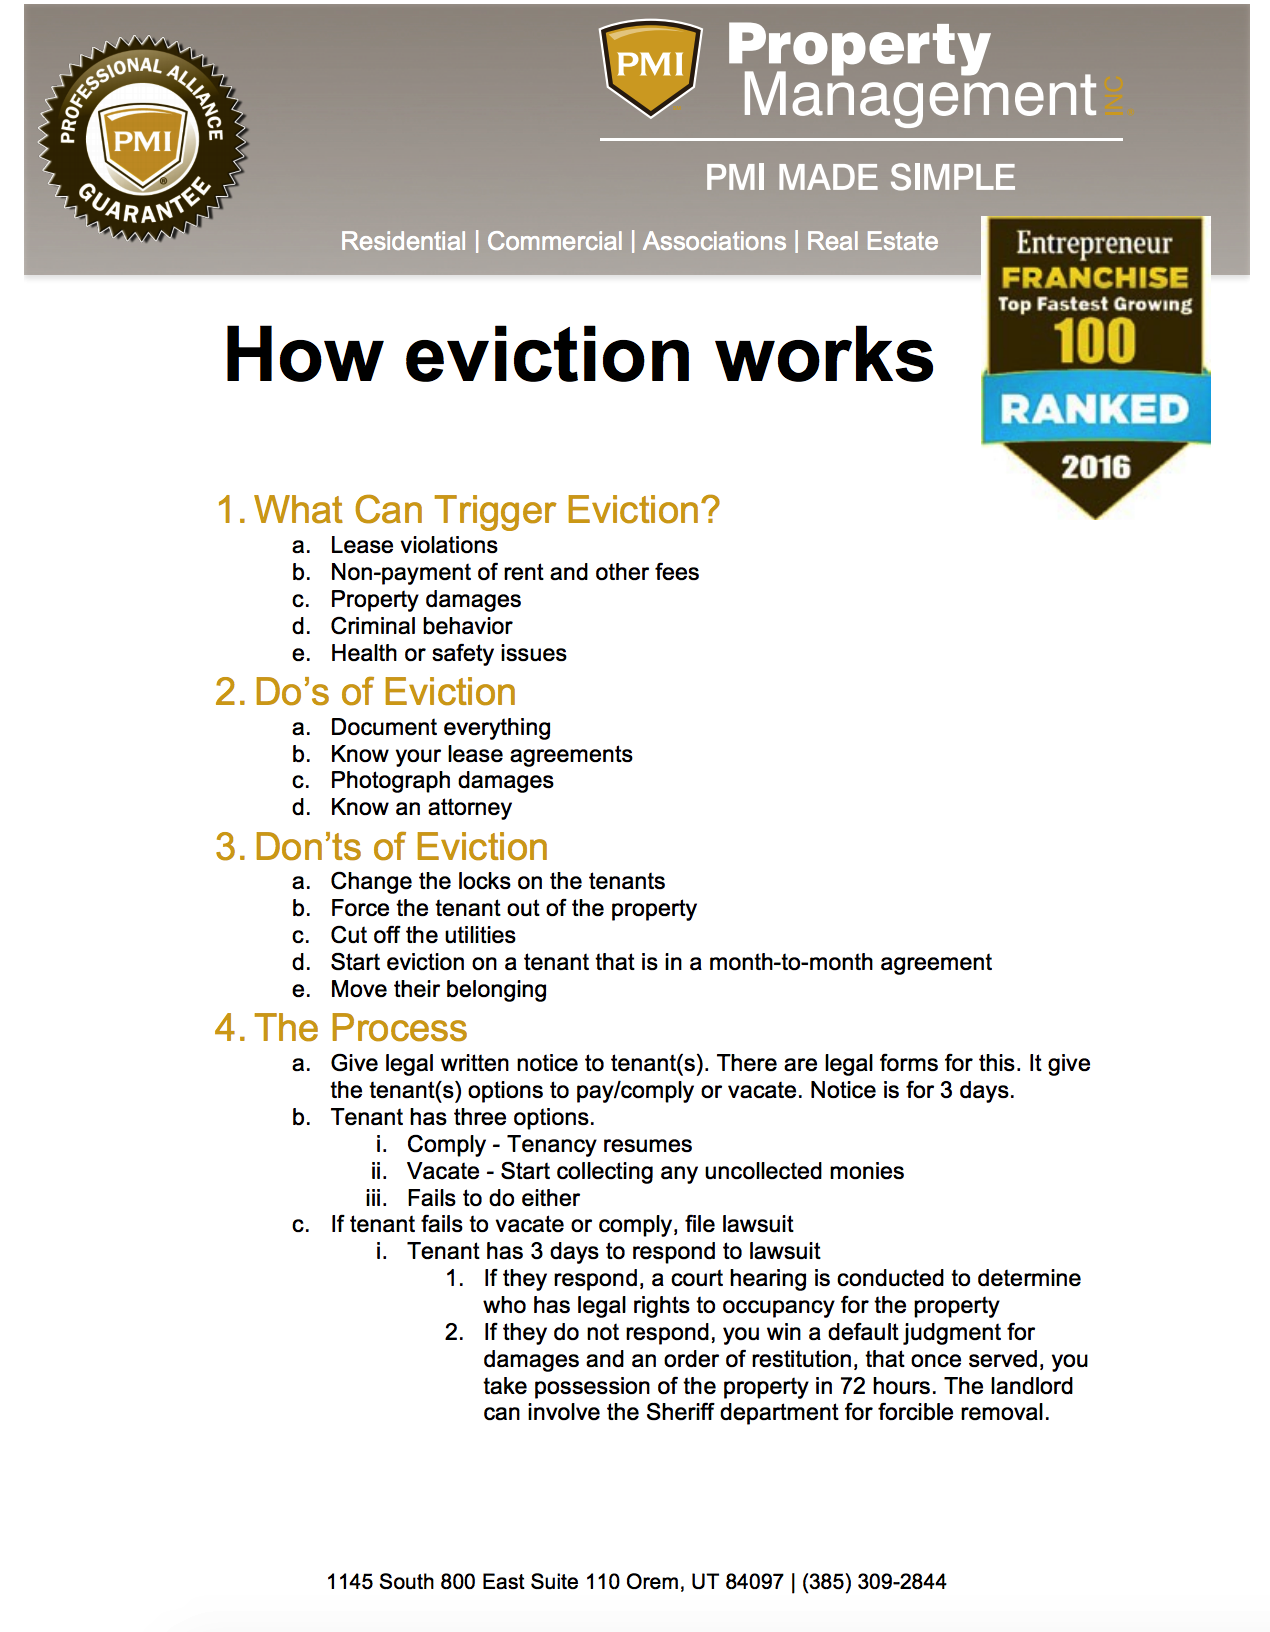 How Eviction Works